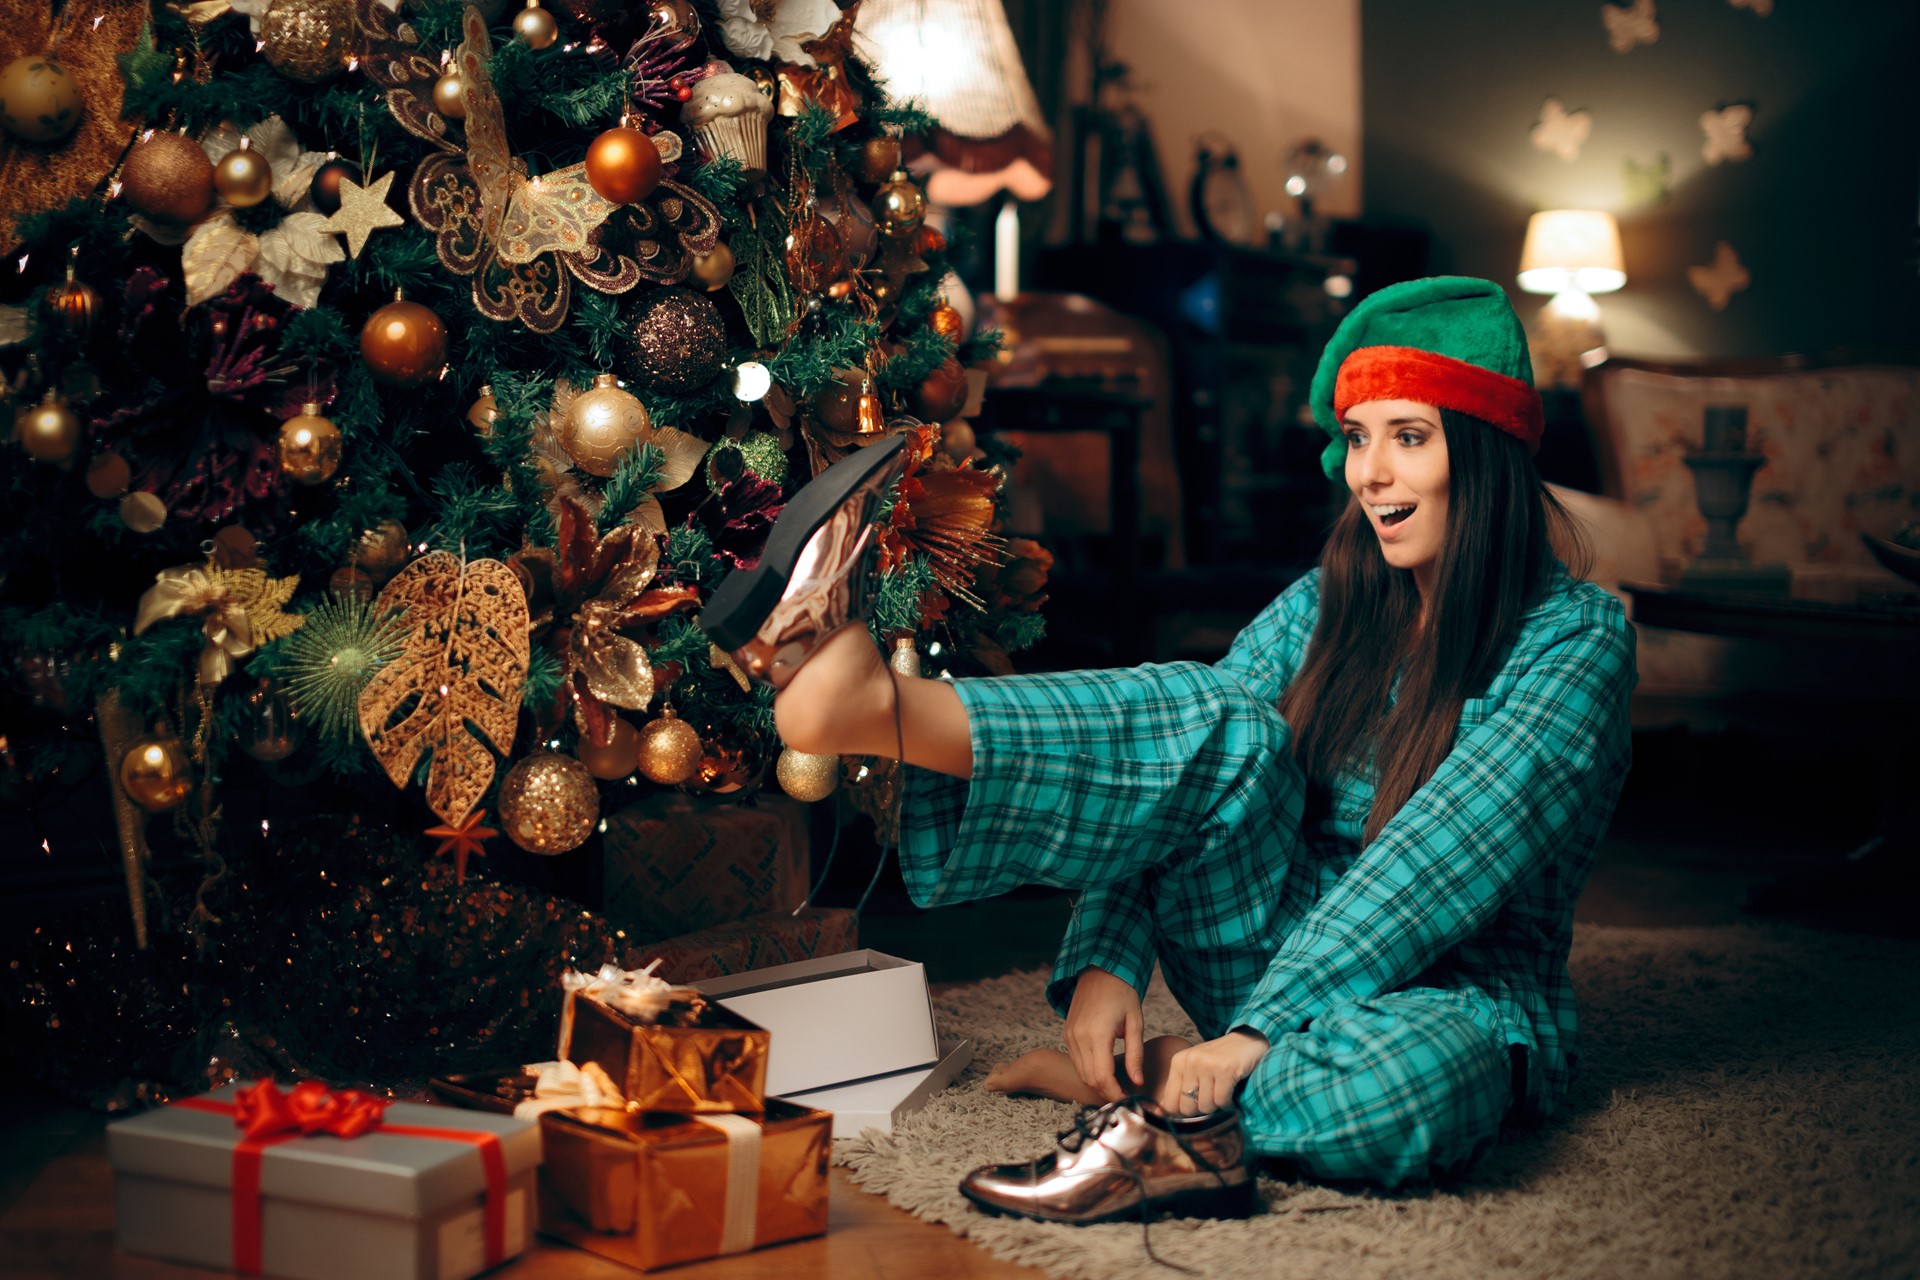 woman trying on shoes under Christmas tree